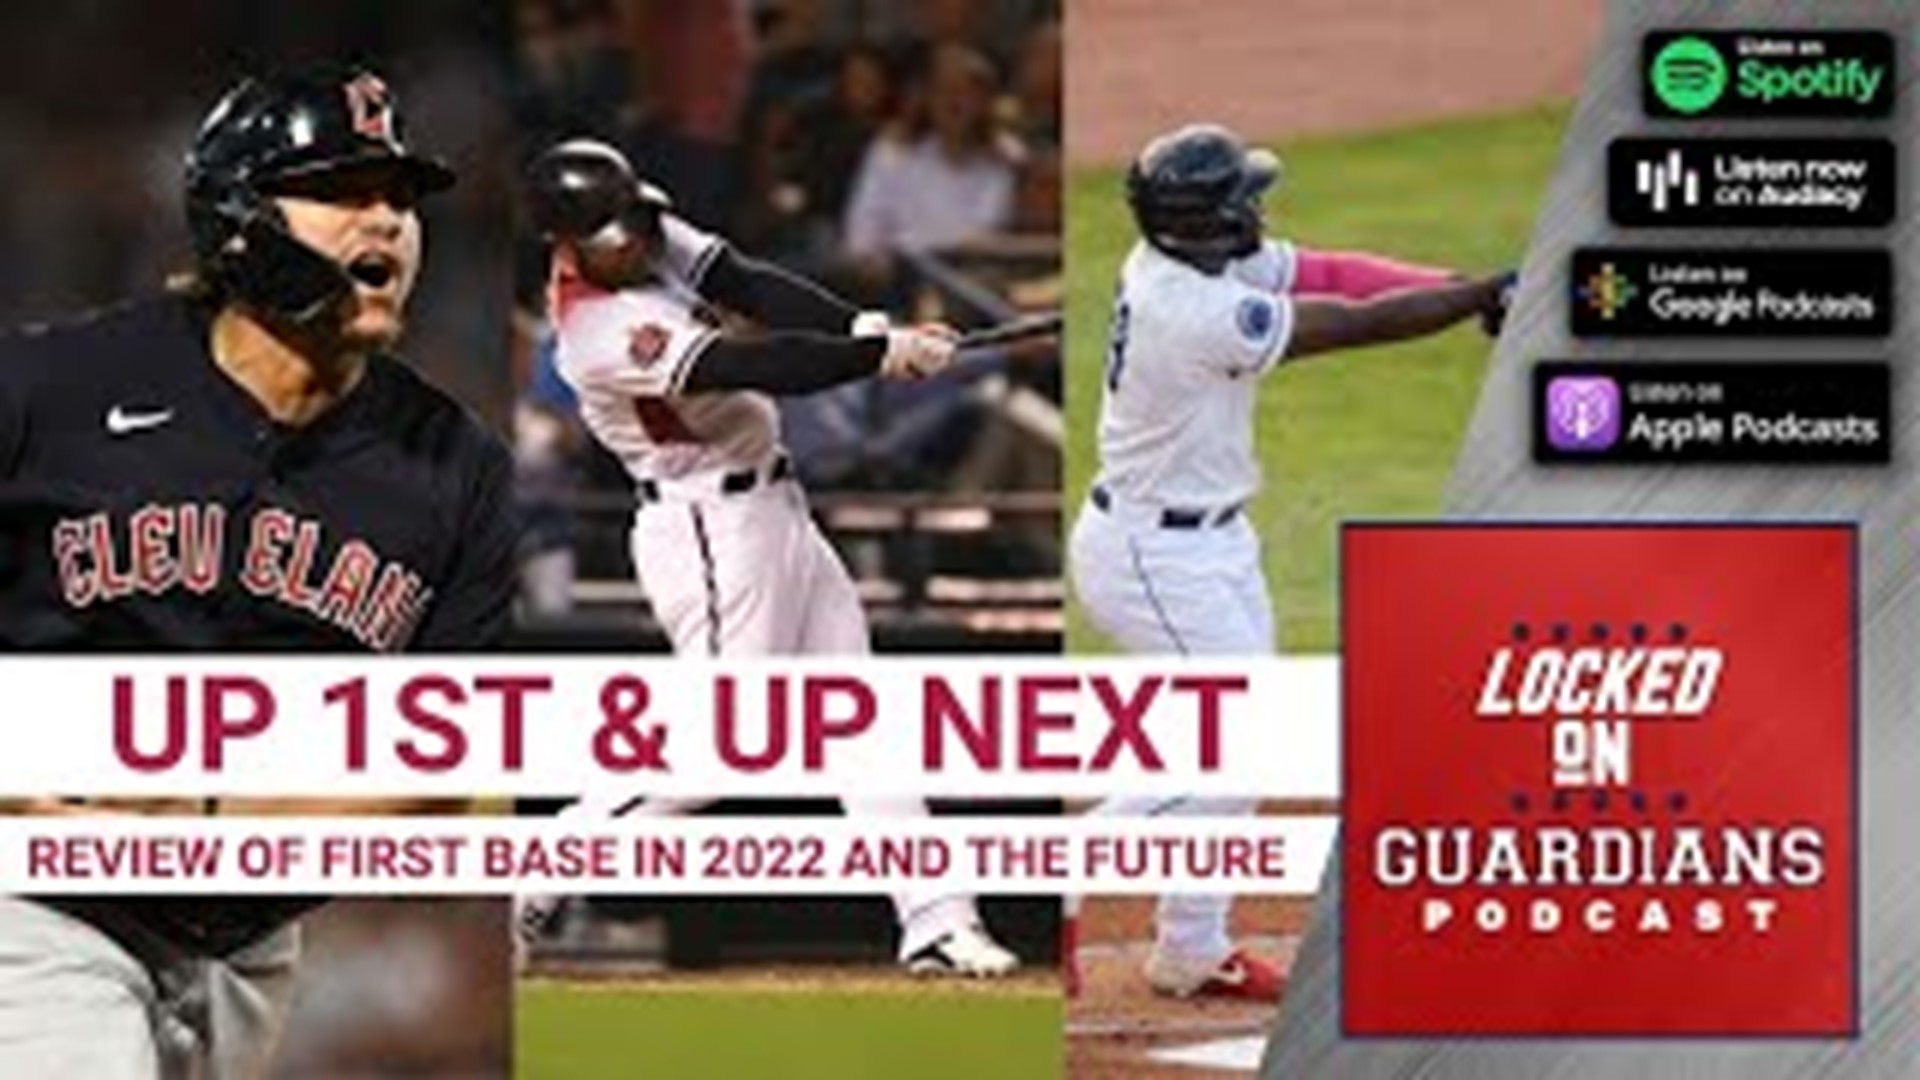 Jeff Ellis and Justin Lada take a look at the state of the first baseman position in the Cleveland Guardians organization.